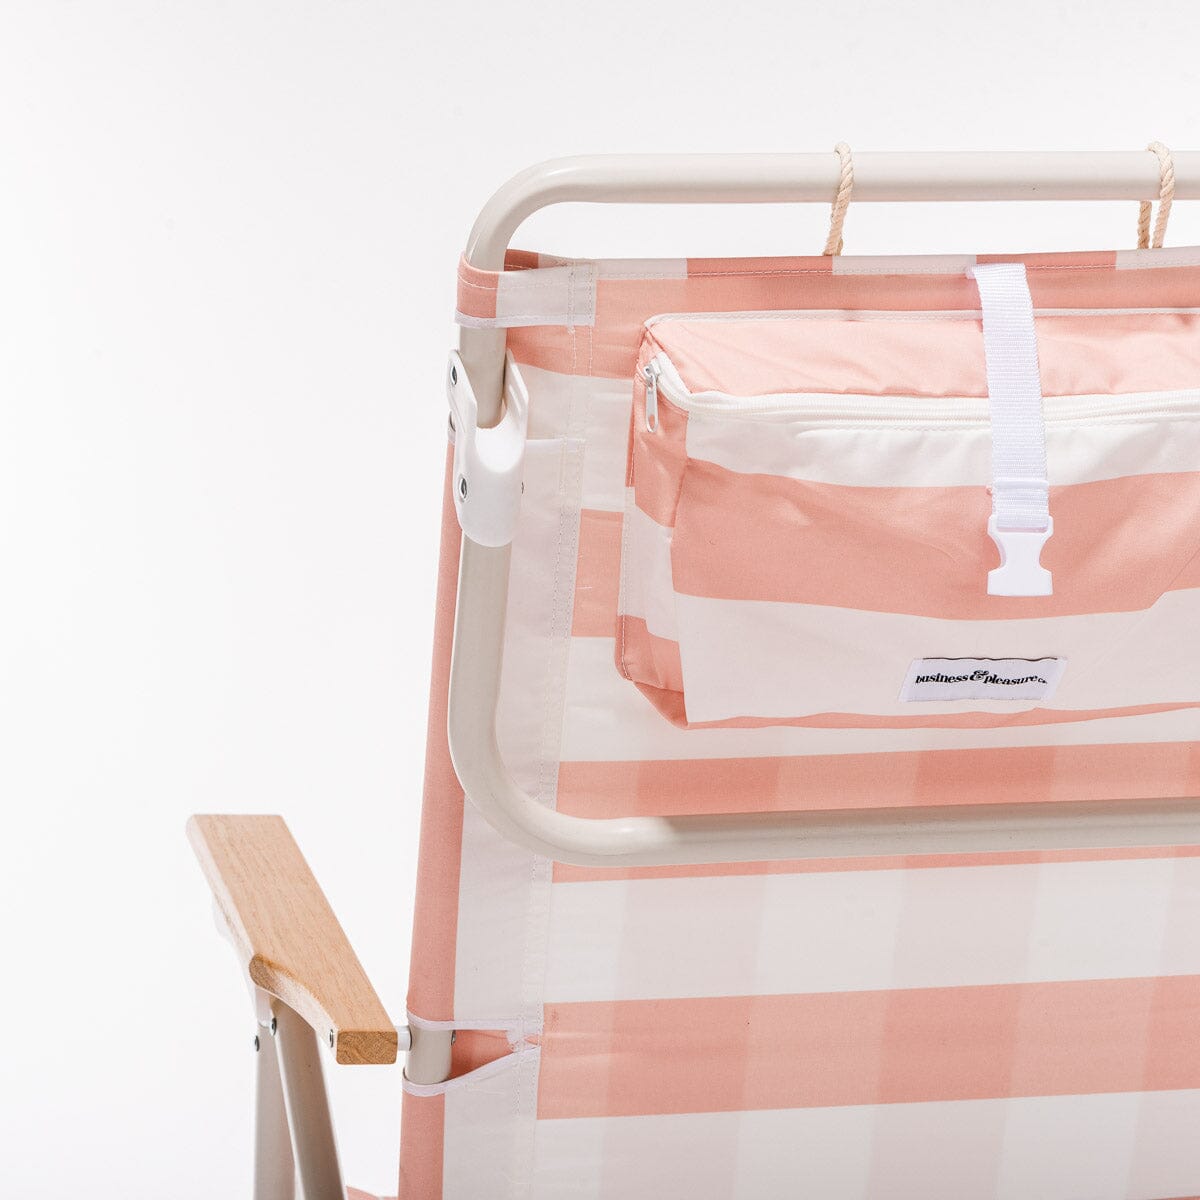 The Holiday Tommy Chair - Pink Capri Stripe Holiday Tommy Chair Business & Pleasure Co 